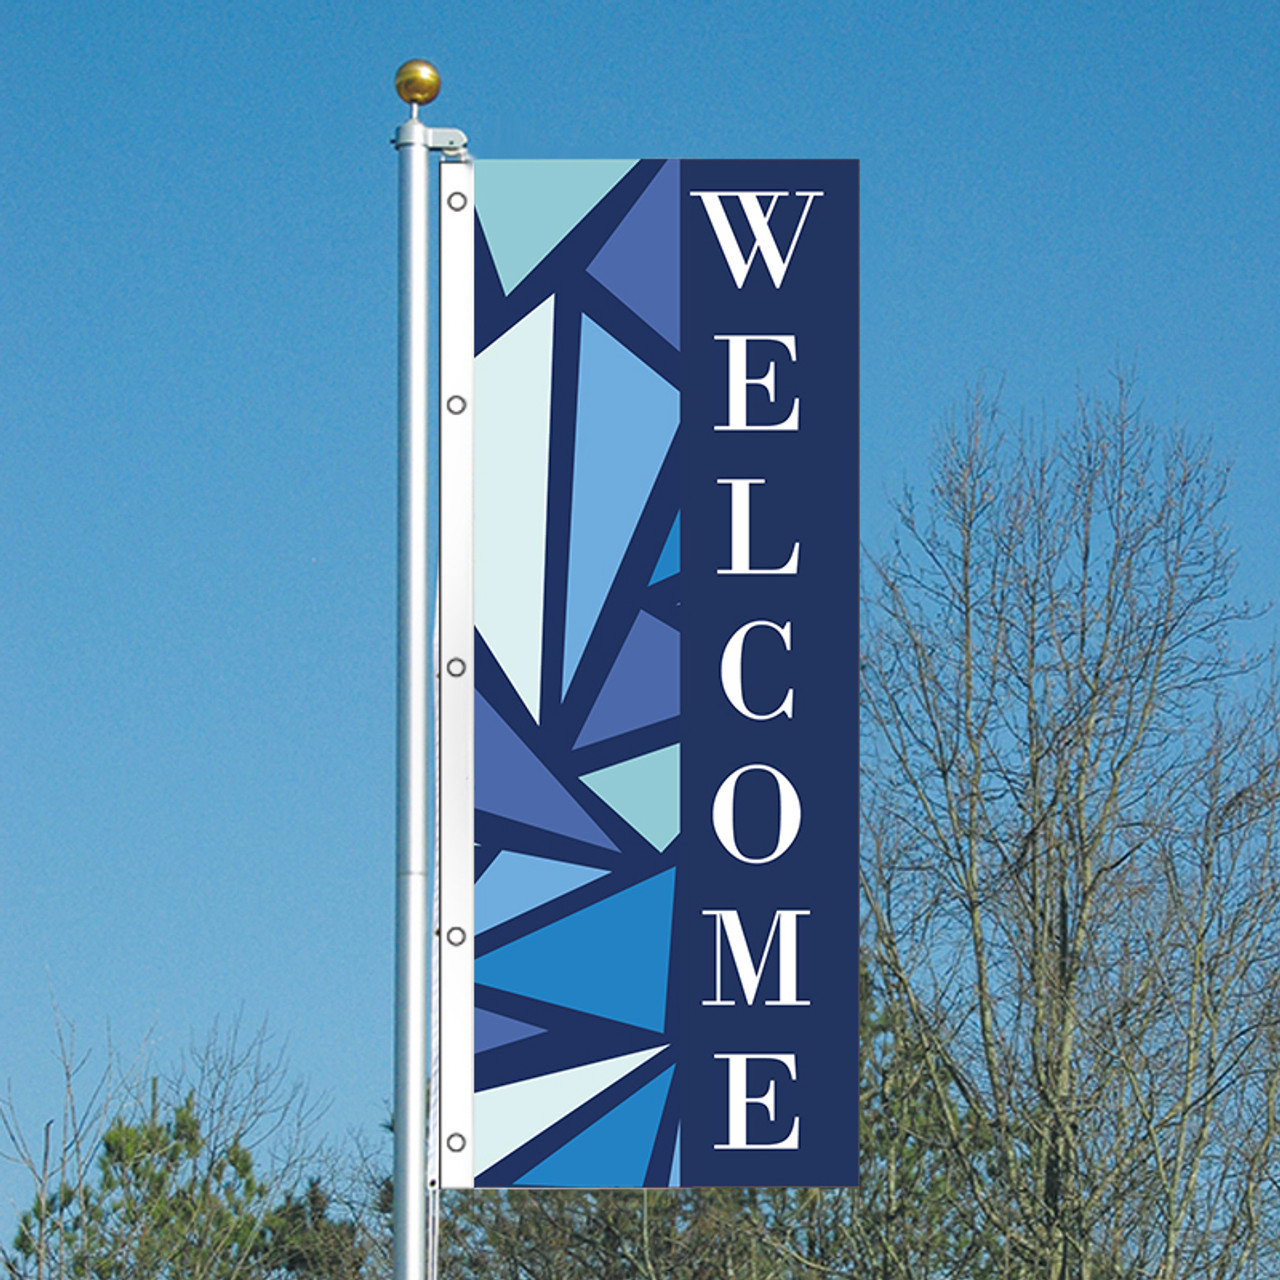 Blue Ice - 3x8 Vertical Outdoor Marketing Flag